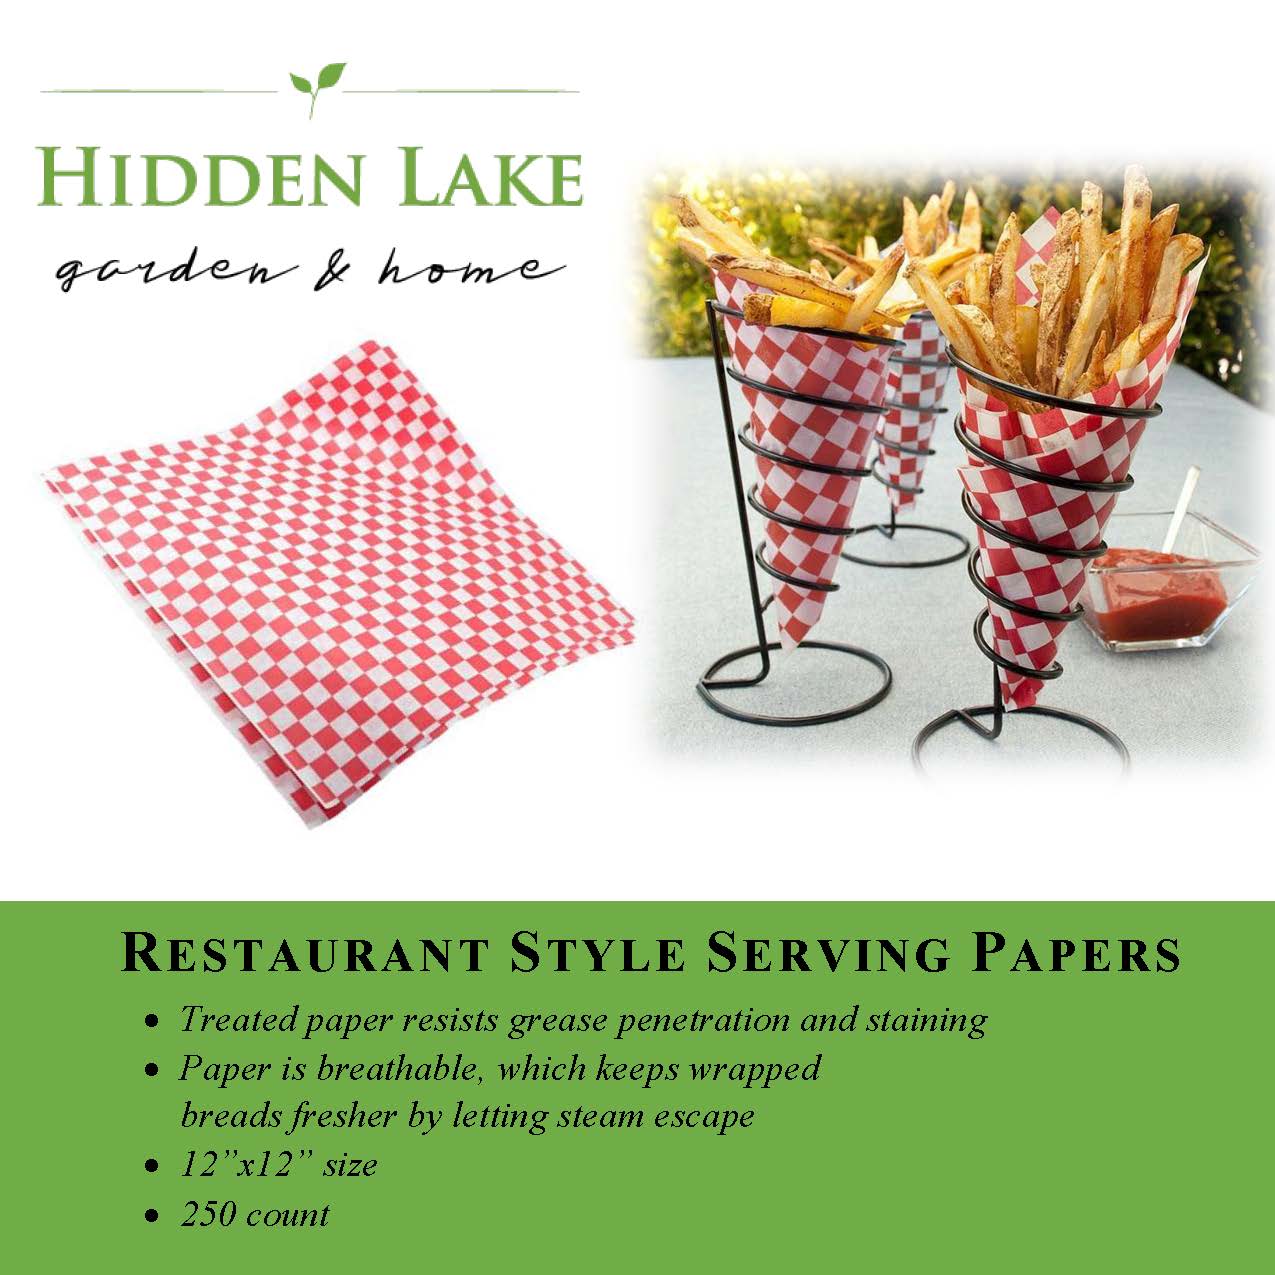 Red and White Small Checked Serving Food Wrap Paper – Hidden Lake Garden  Home